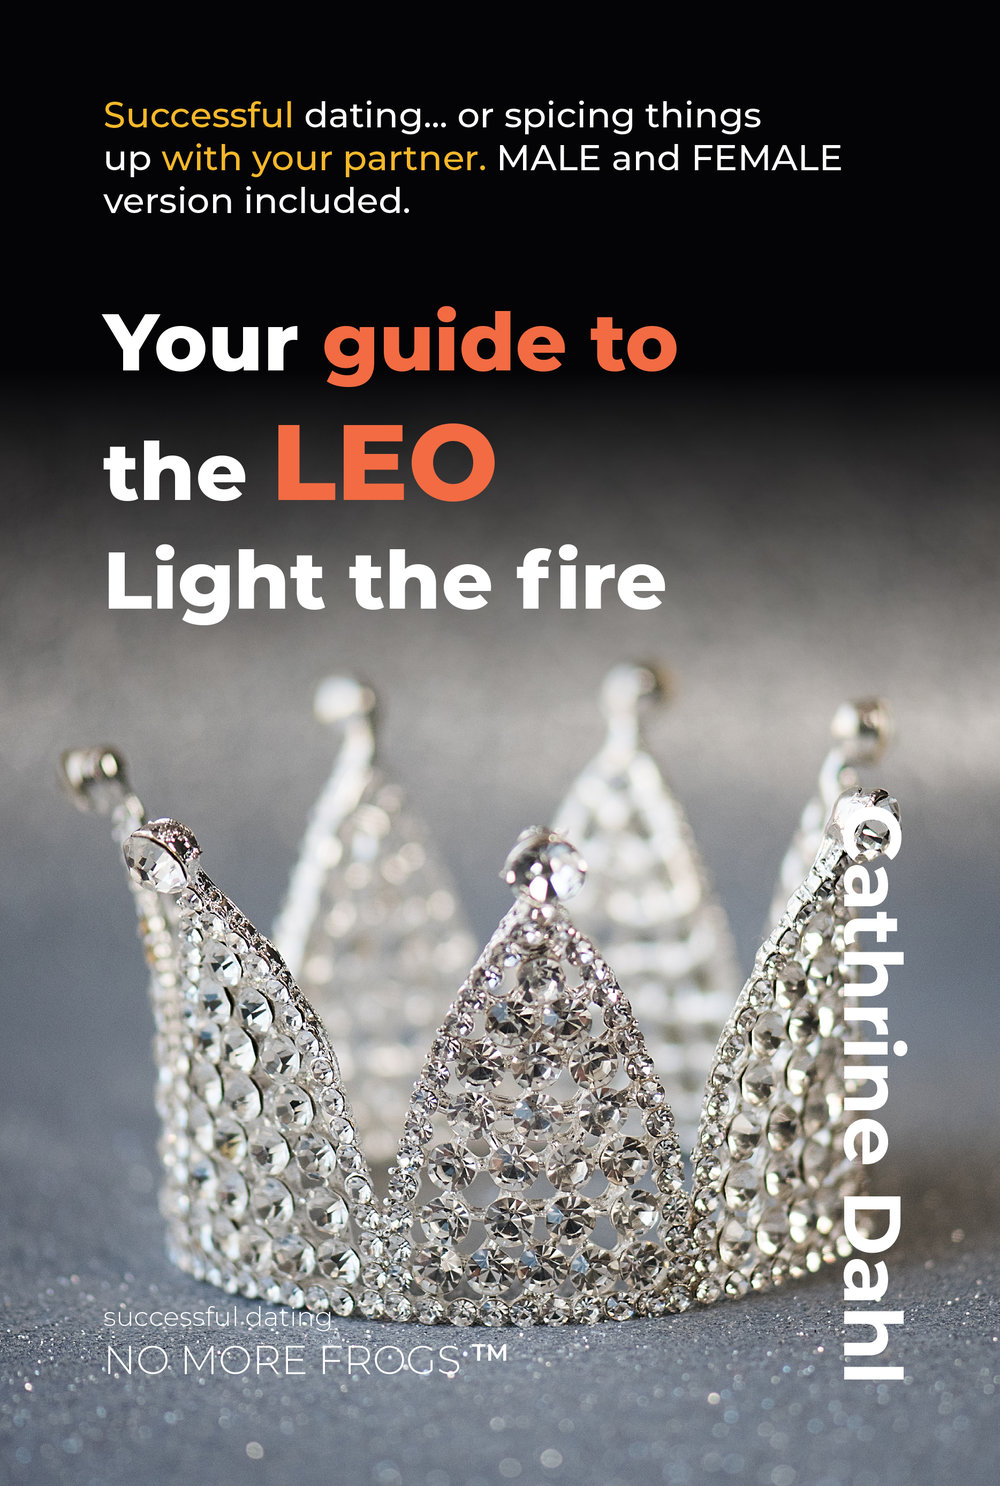 Dating or getting to know the Leo man and the Leo woman (Copy)